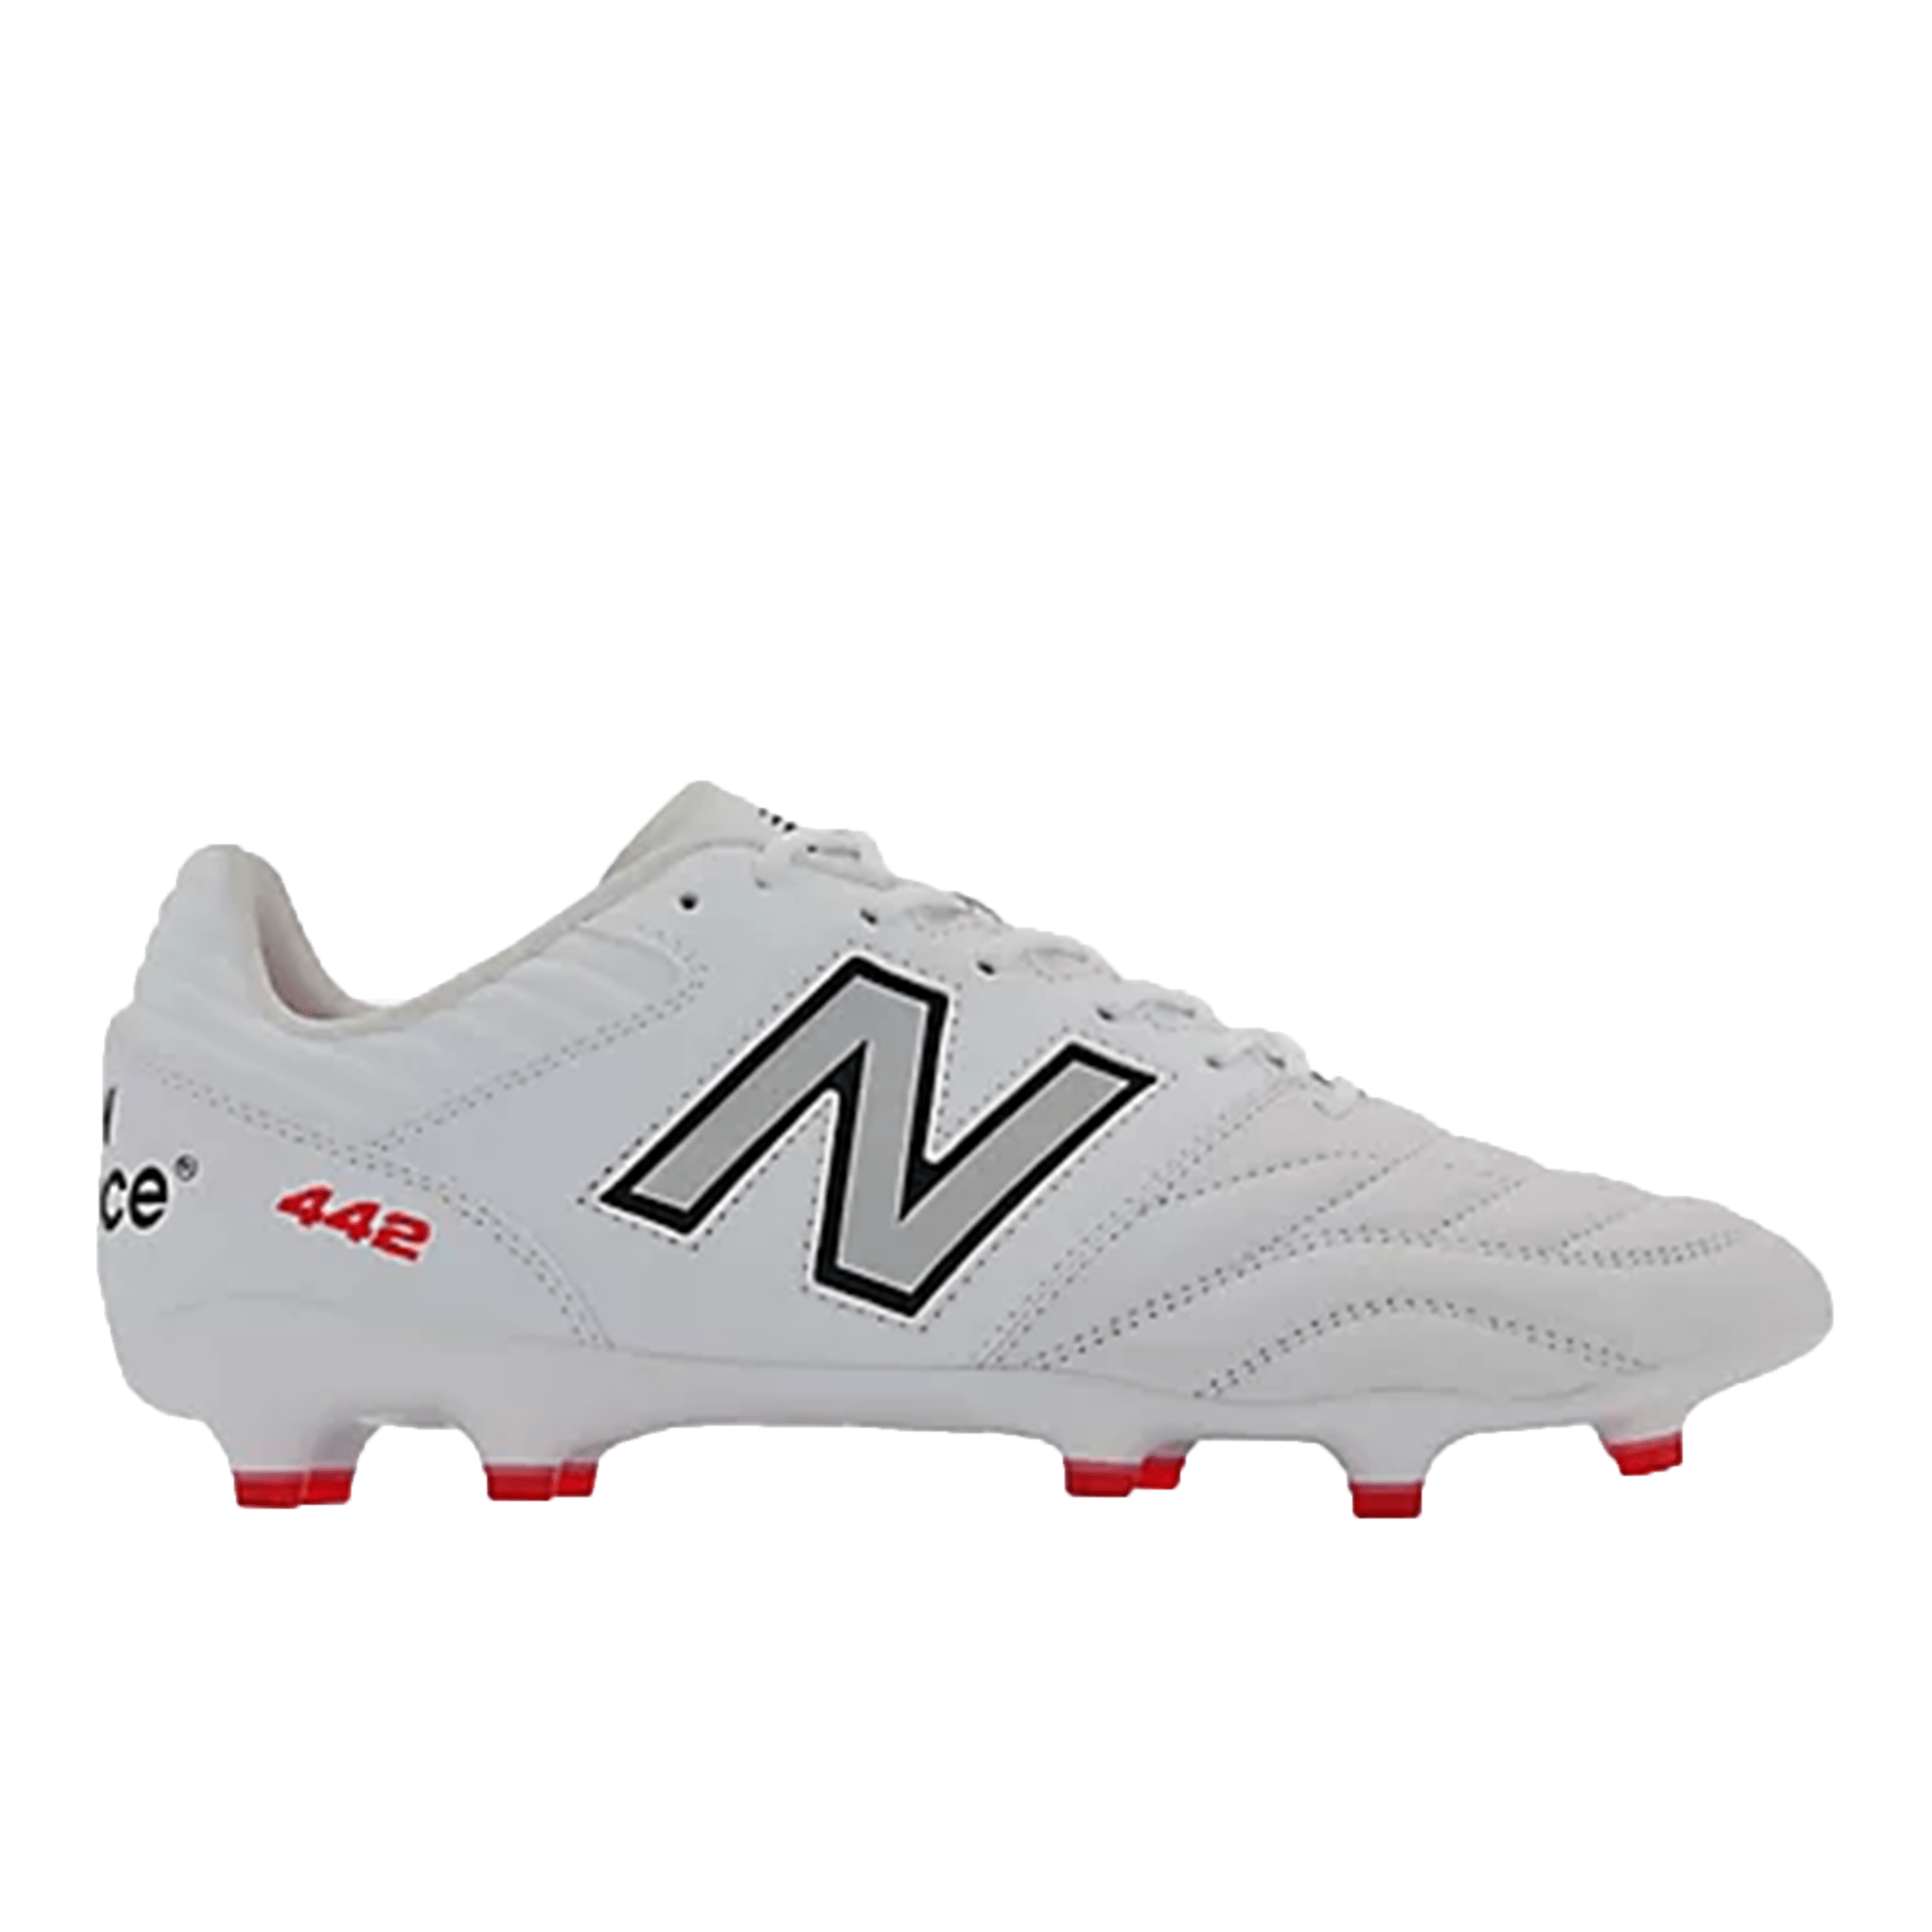 New Balance 442 V2 Pro Rugby Cleat Boot - White/Silver - SKU MS41FWT2-D - World Rugby Shop